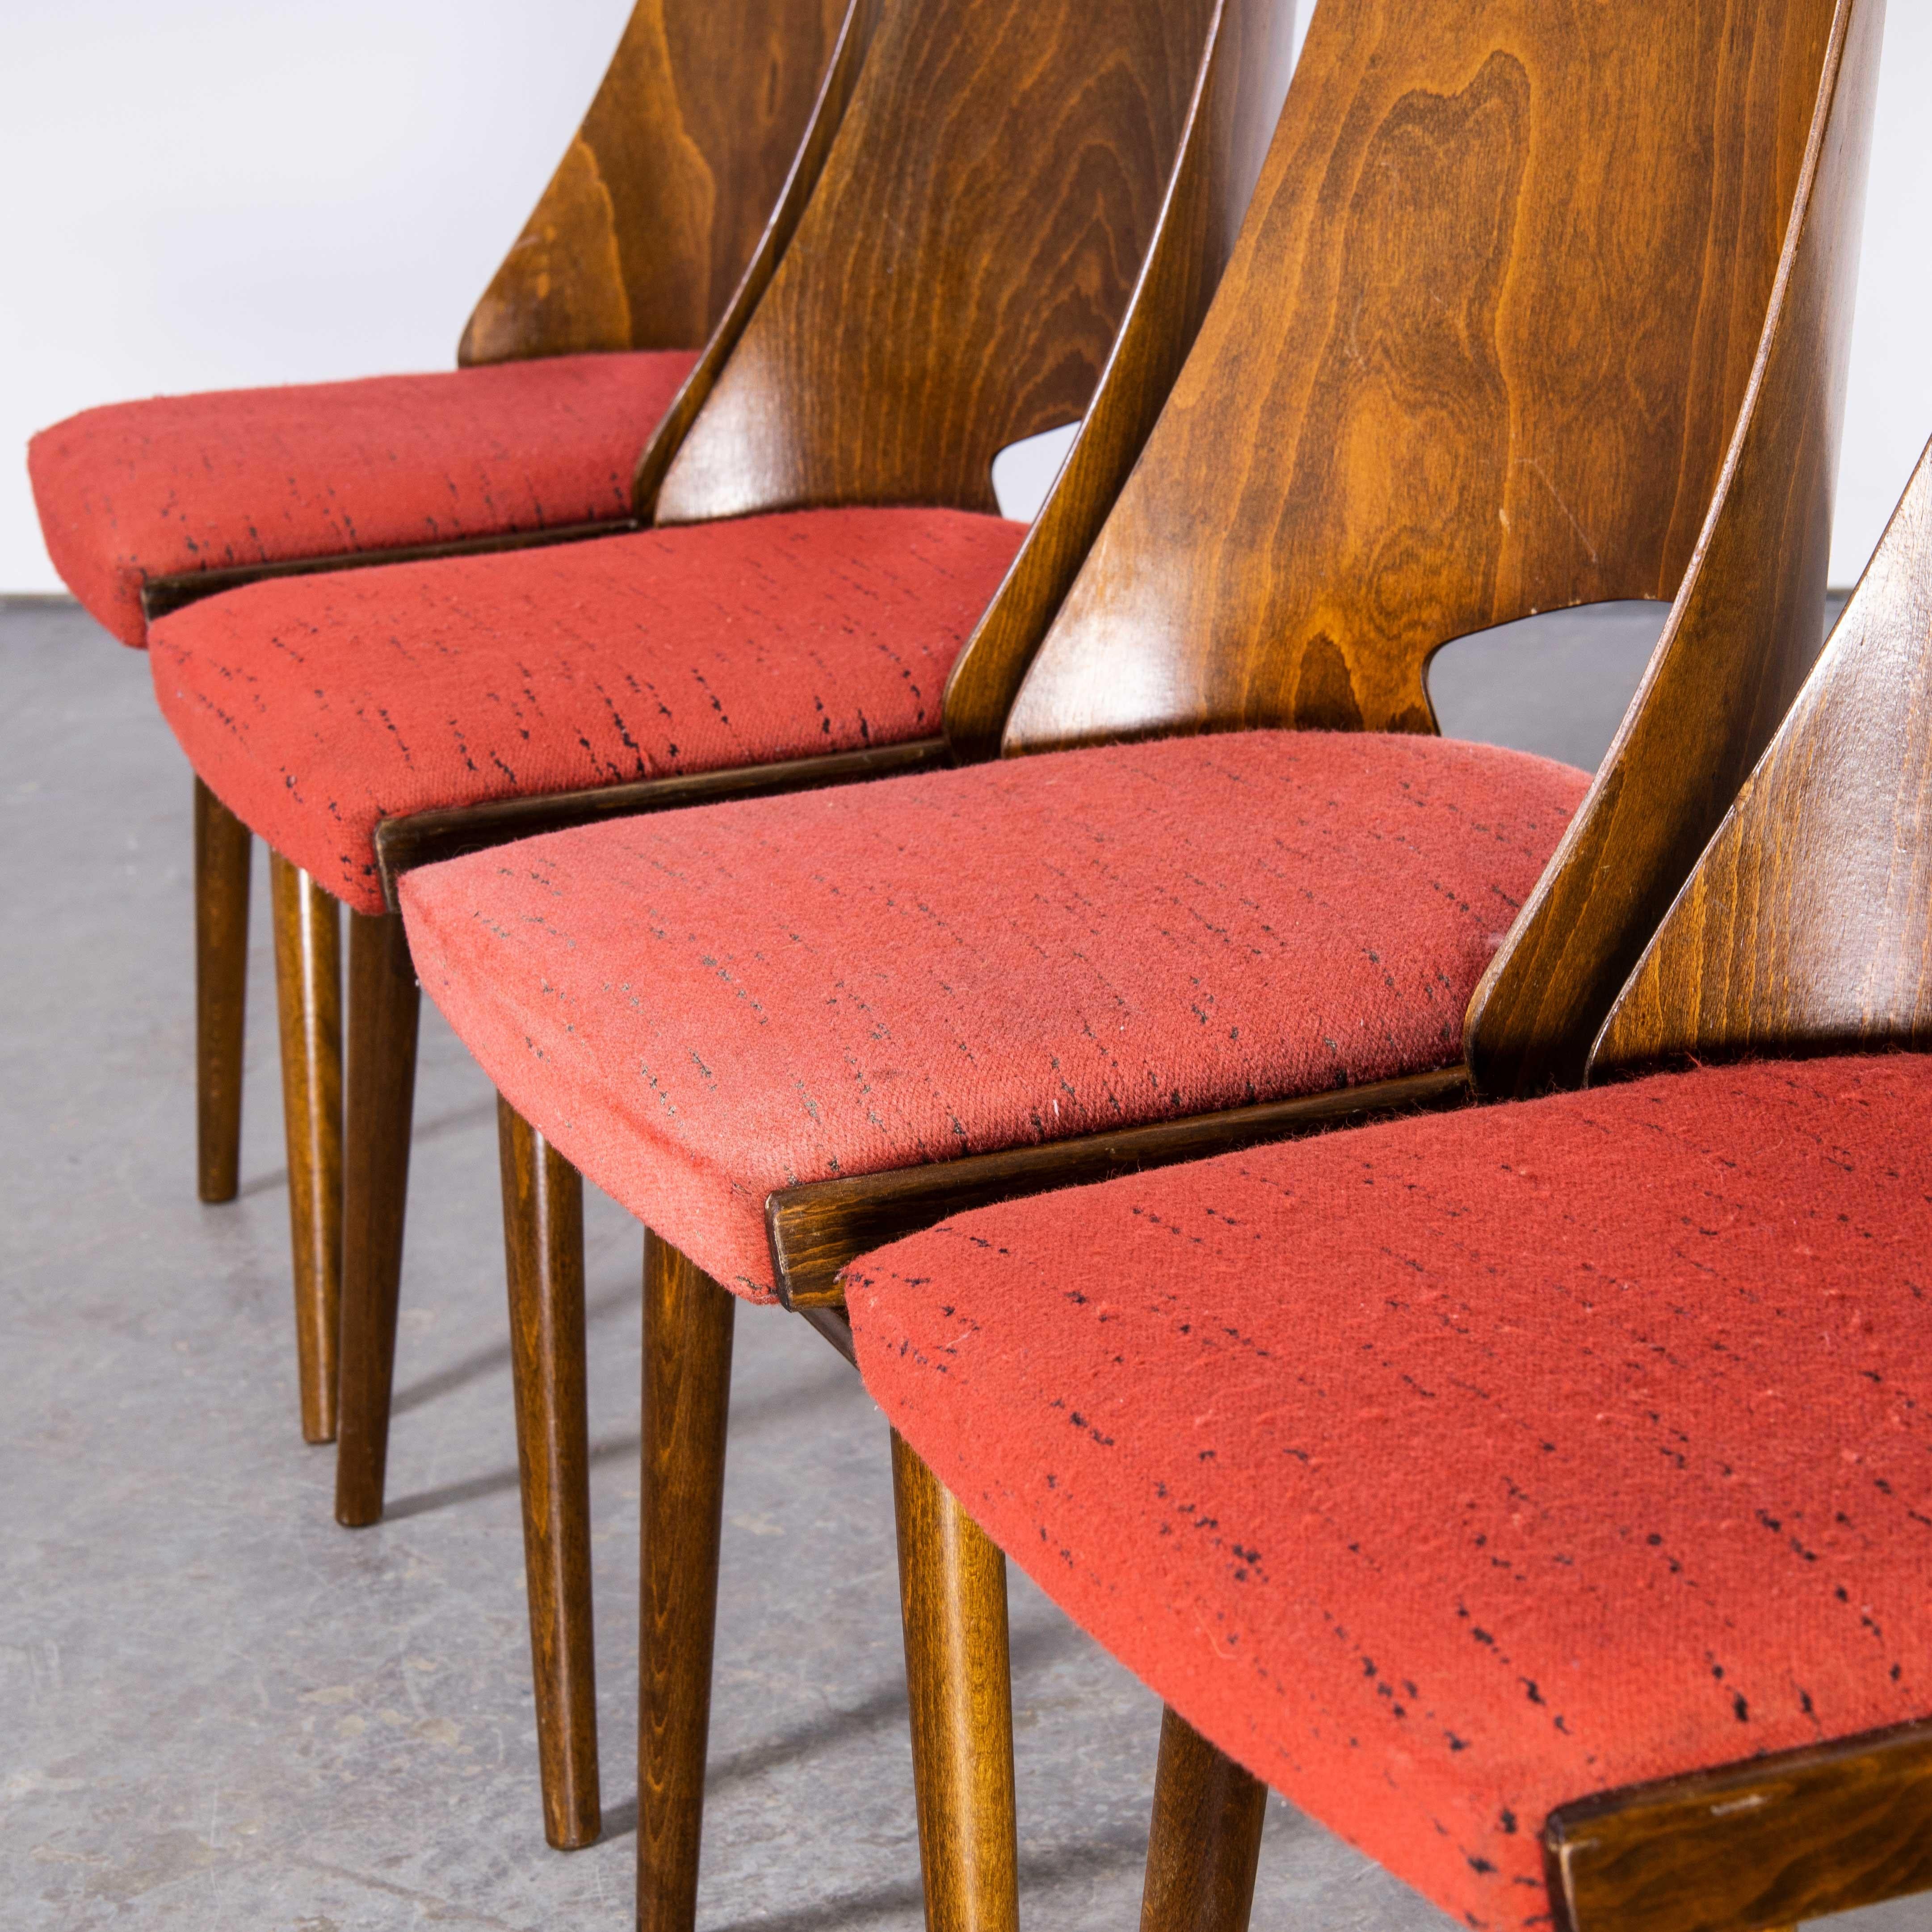 1950's Upholstered Thon Warm Oak Dining Chairs by Radomir Hoffman, Set of Four For Sale 2